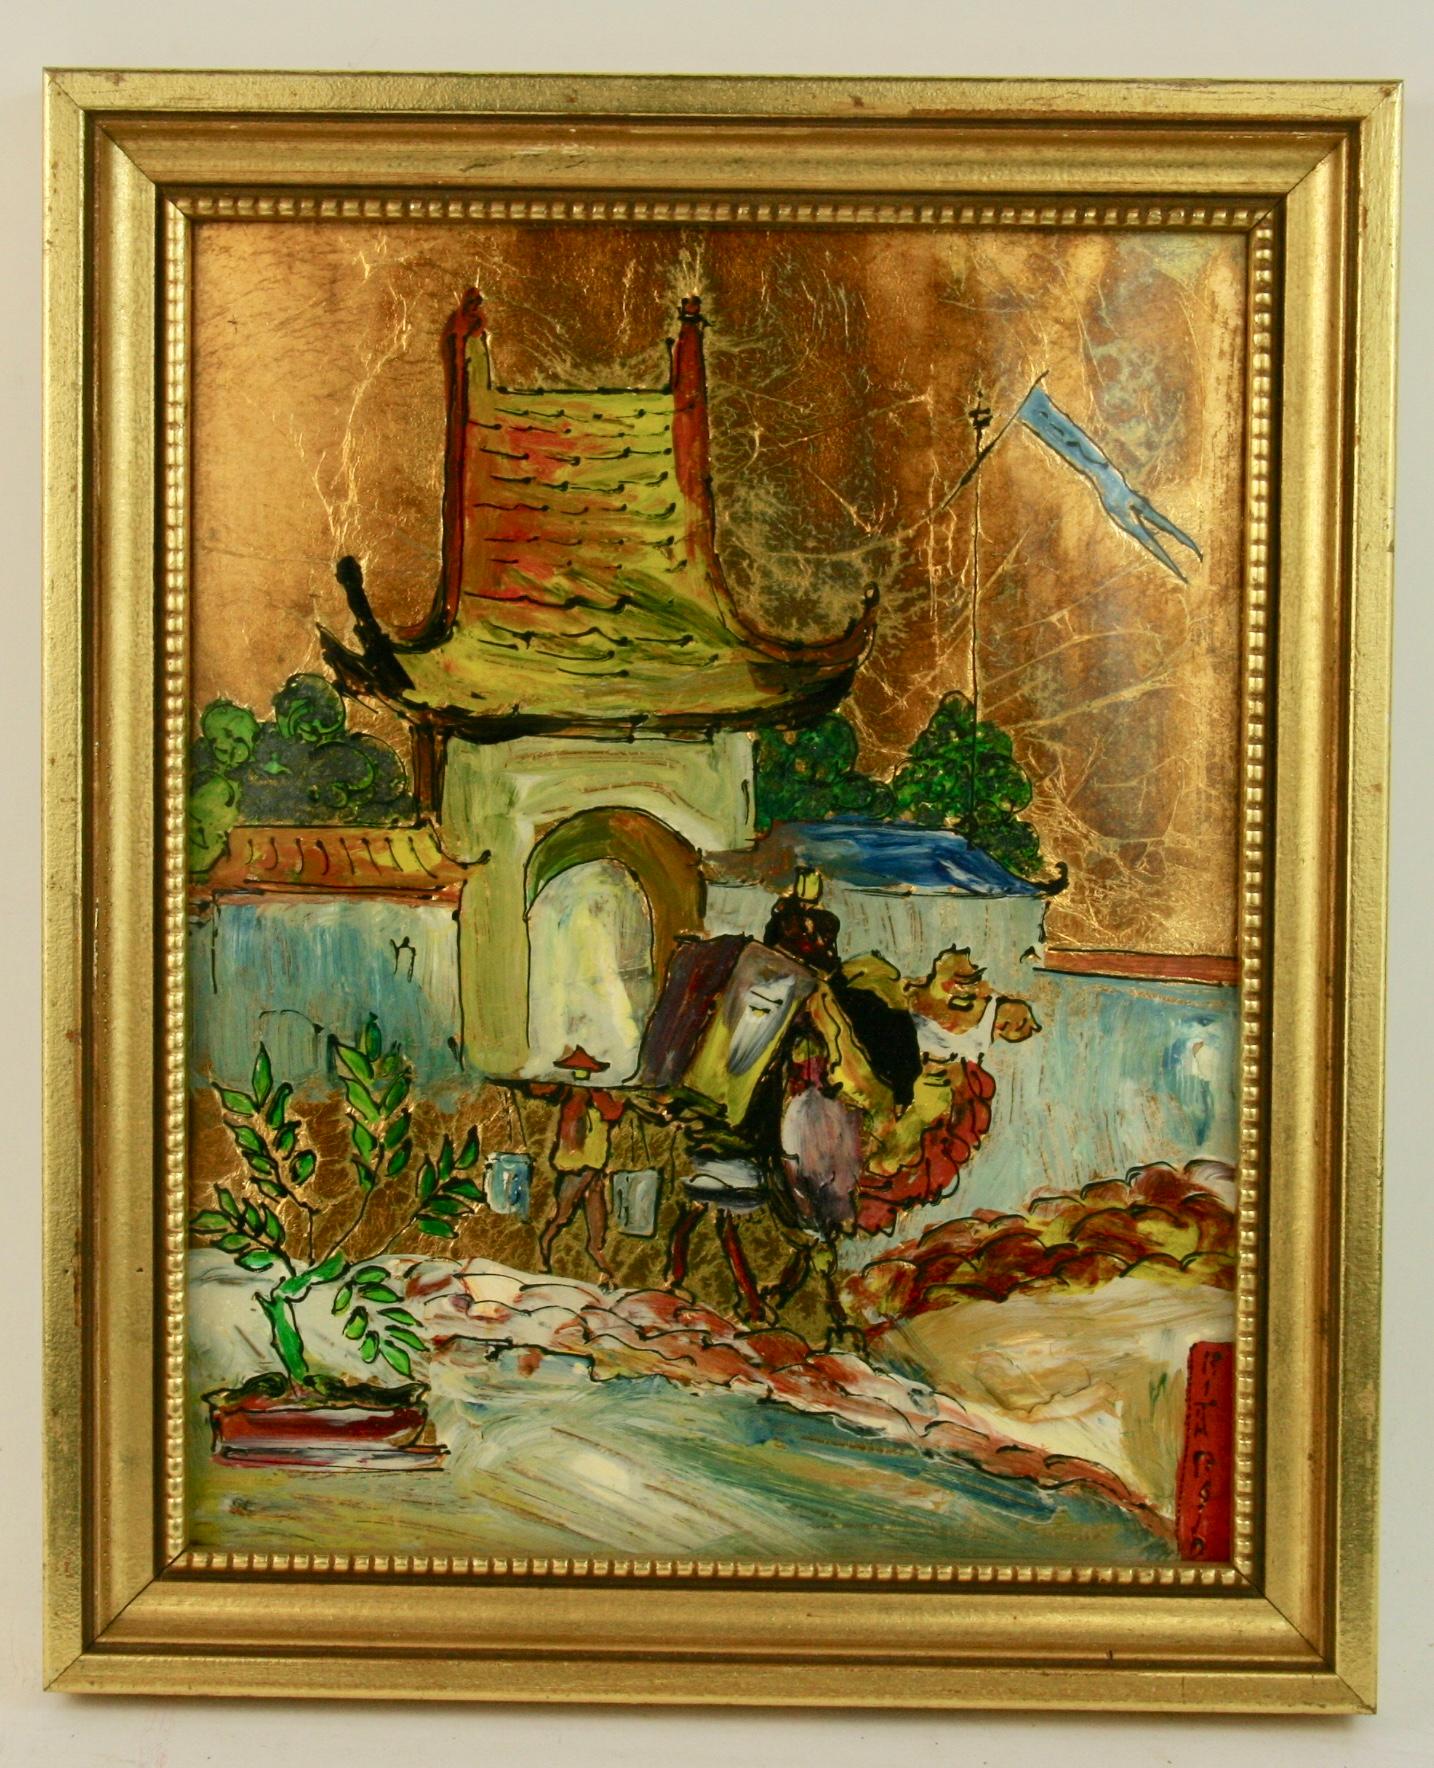 5-3536 Chinese Landscape reverse oil  Painting on glass with gilt detailing
Set in a gilt wood frame
Image size 9.5x7.5